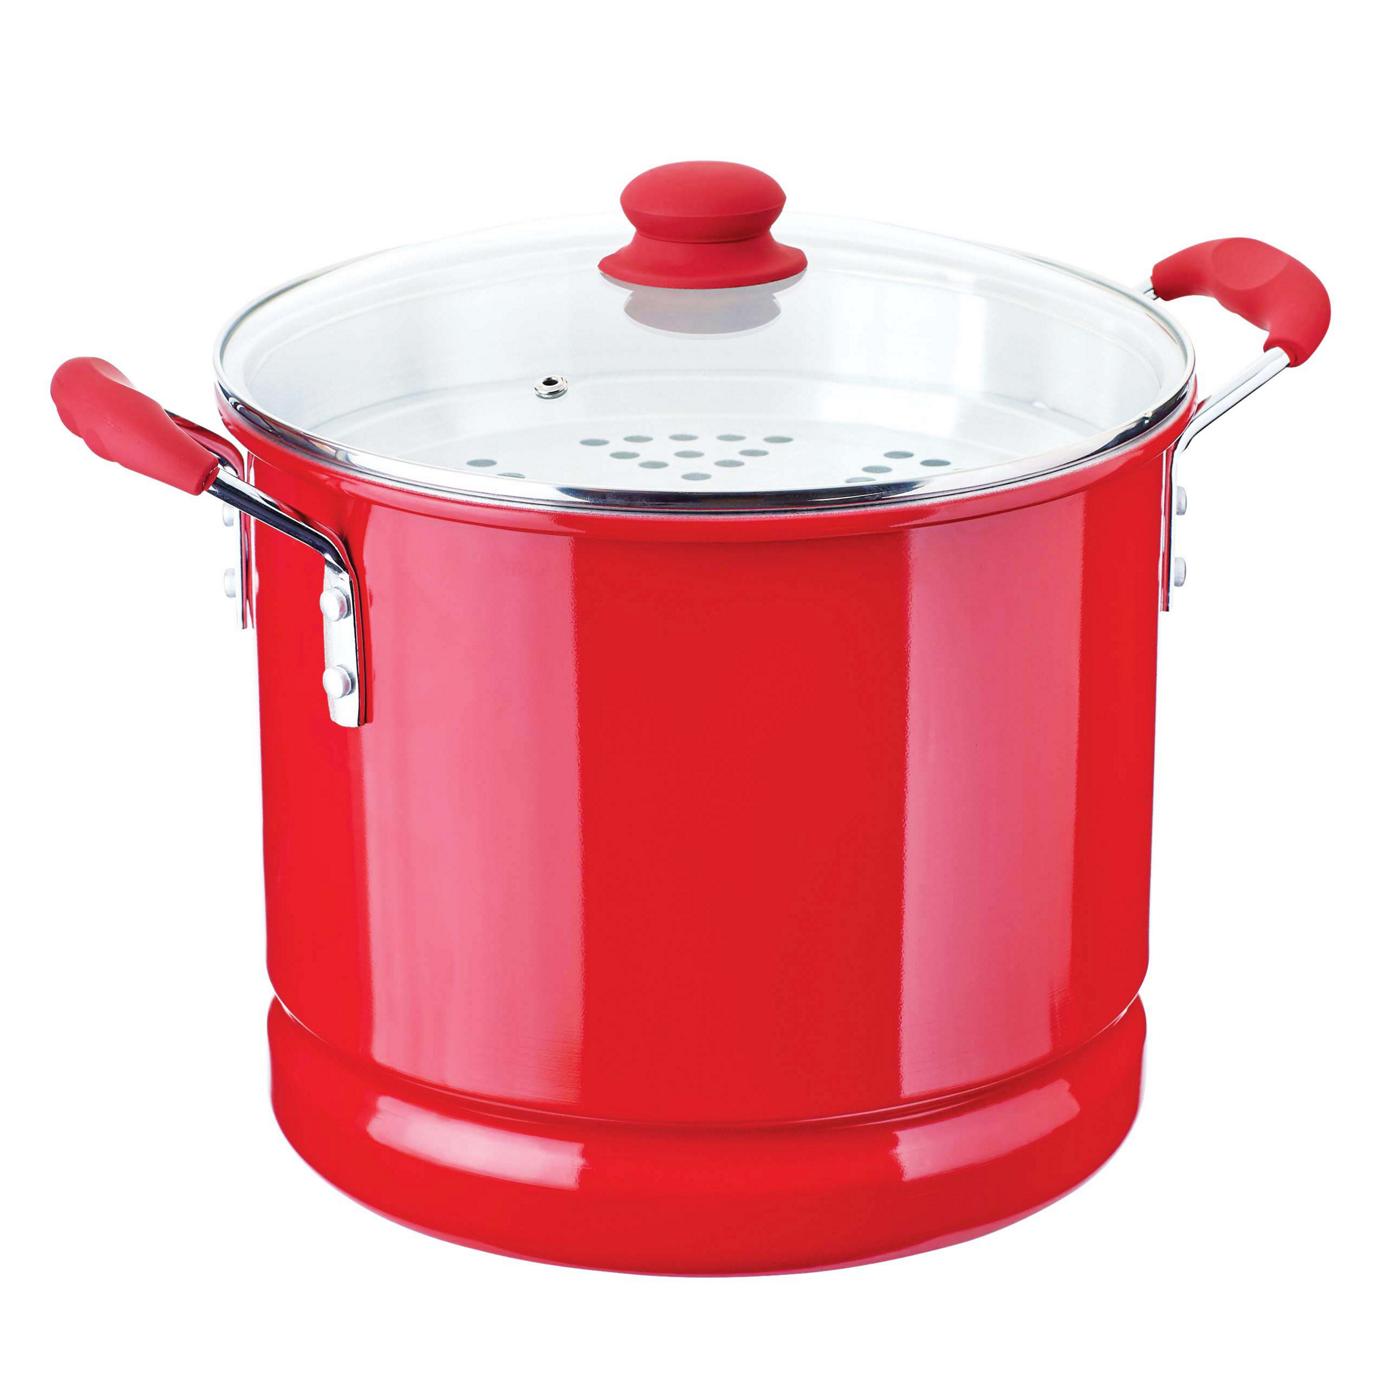 Cocinaware Red Tamale Steamer with Glass Lid; image 2 of 2